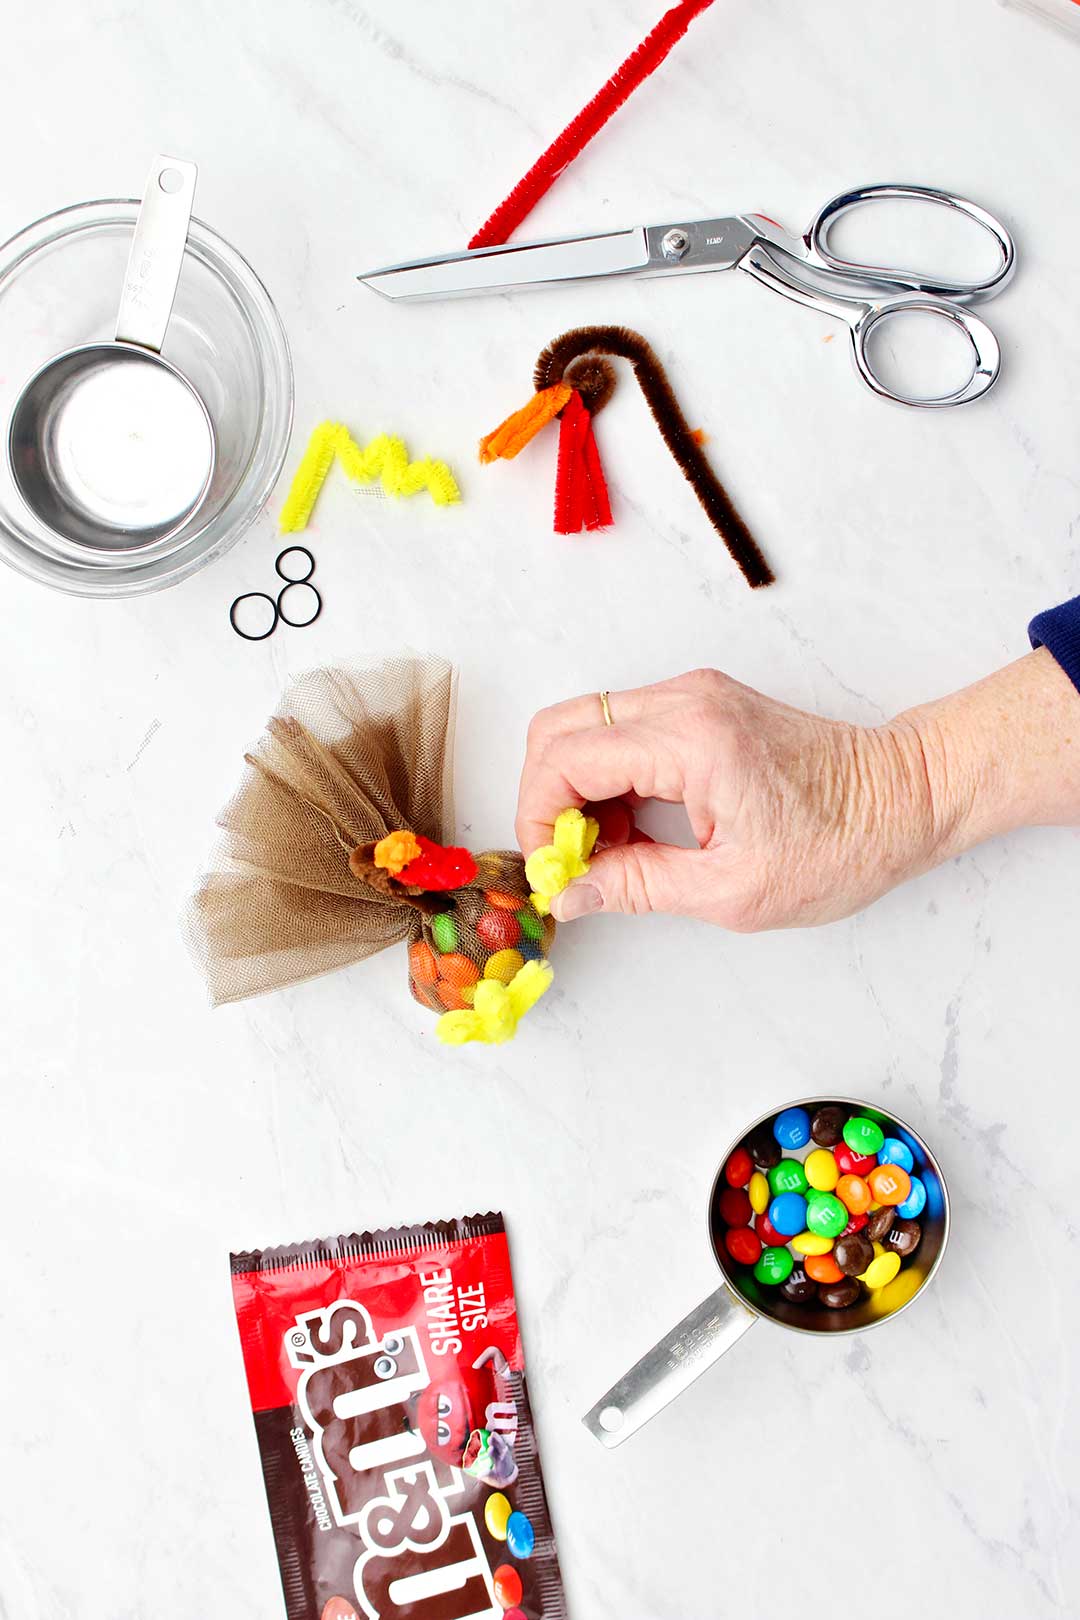 Hand securing pipe cleaner feet on turkey with various supplies near by.